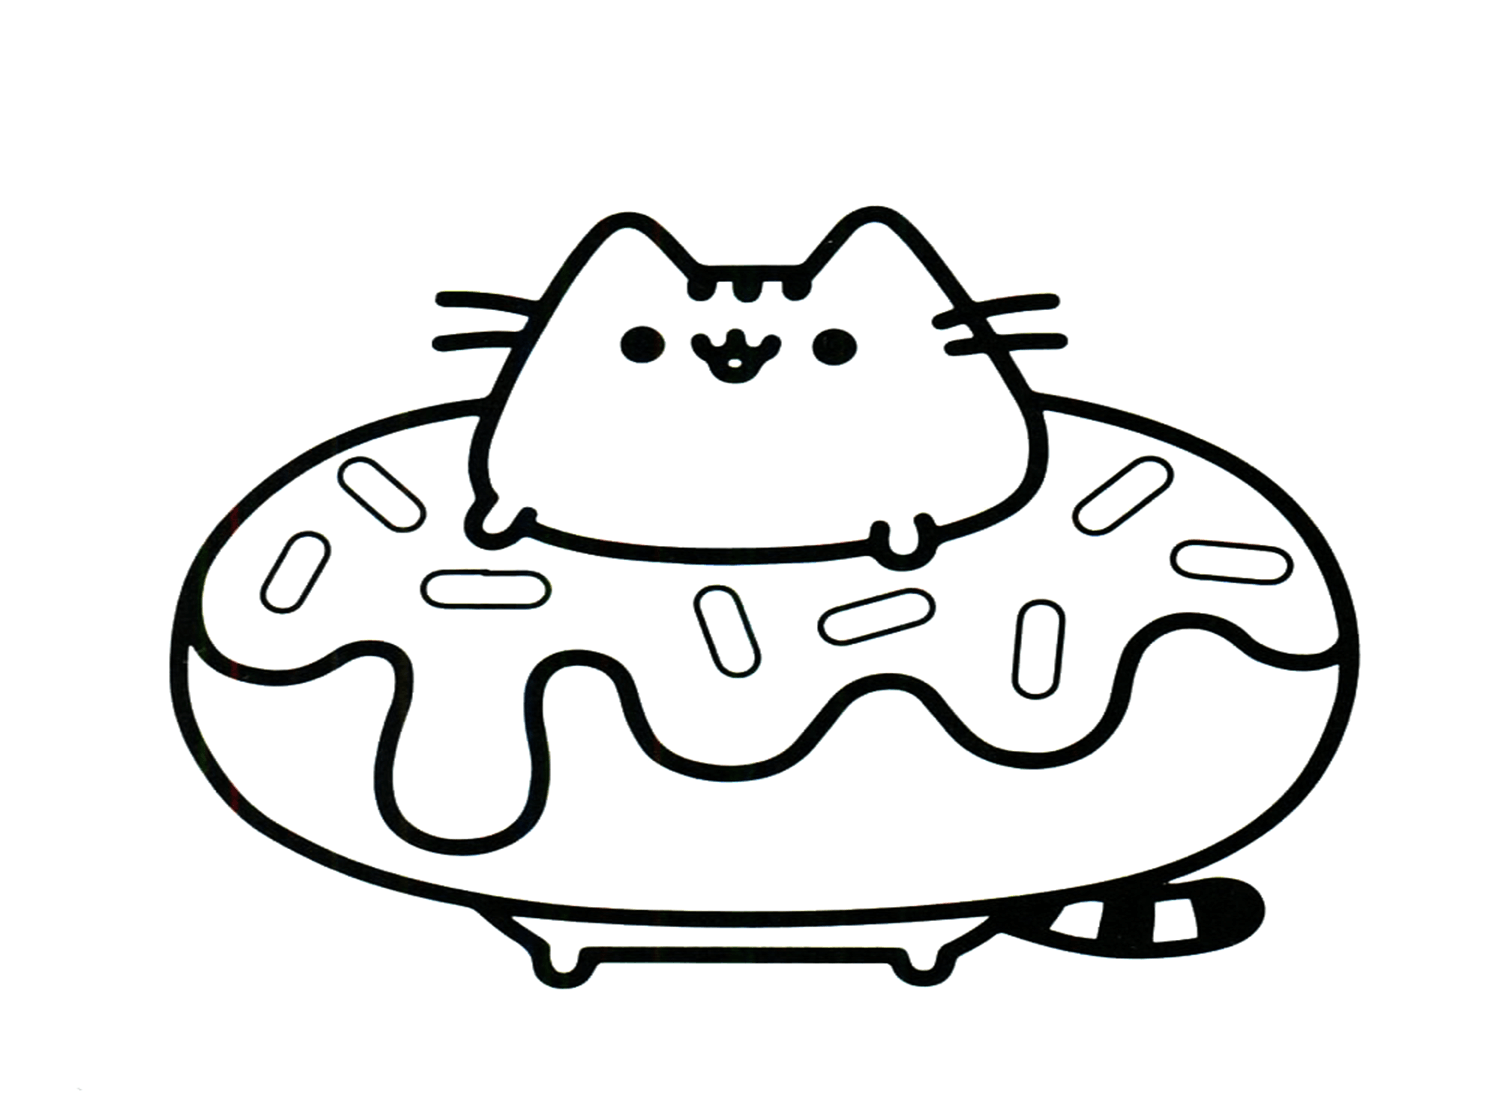 Kitty Donut Coloring Pages from Donut